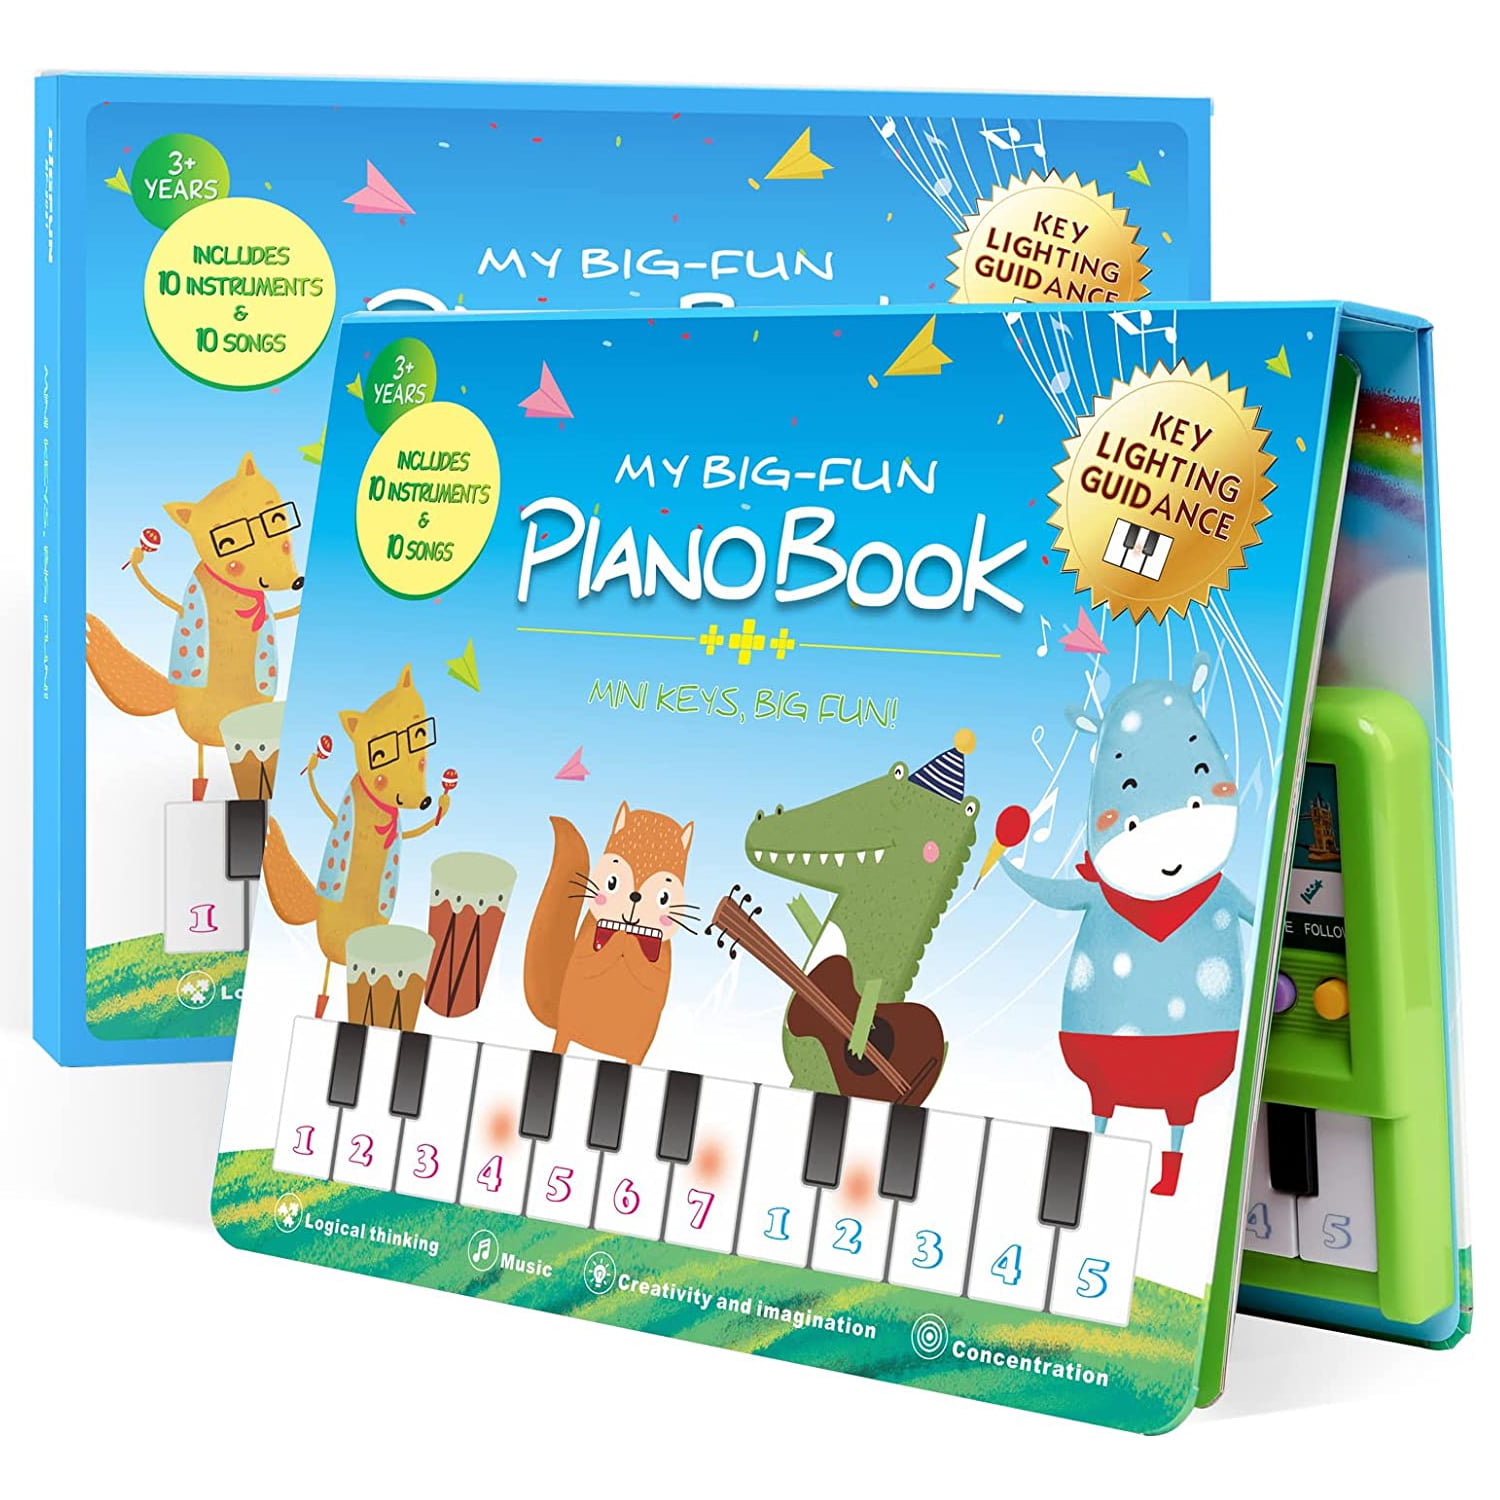 Sytle-Carry My First Piano Book Toy, Musical Toys, Educational Musical Toy  for Toddlers, Toys for Kids Girls Boys 3-6 Years 